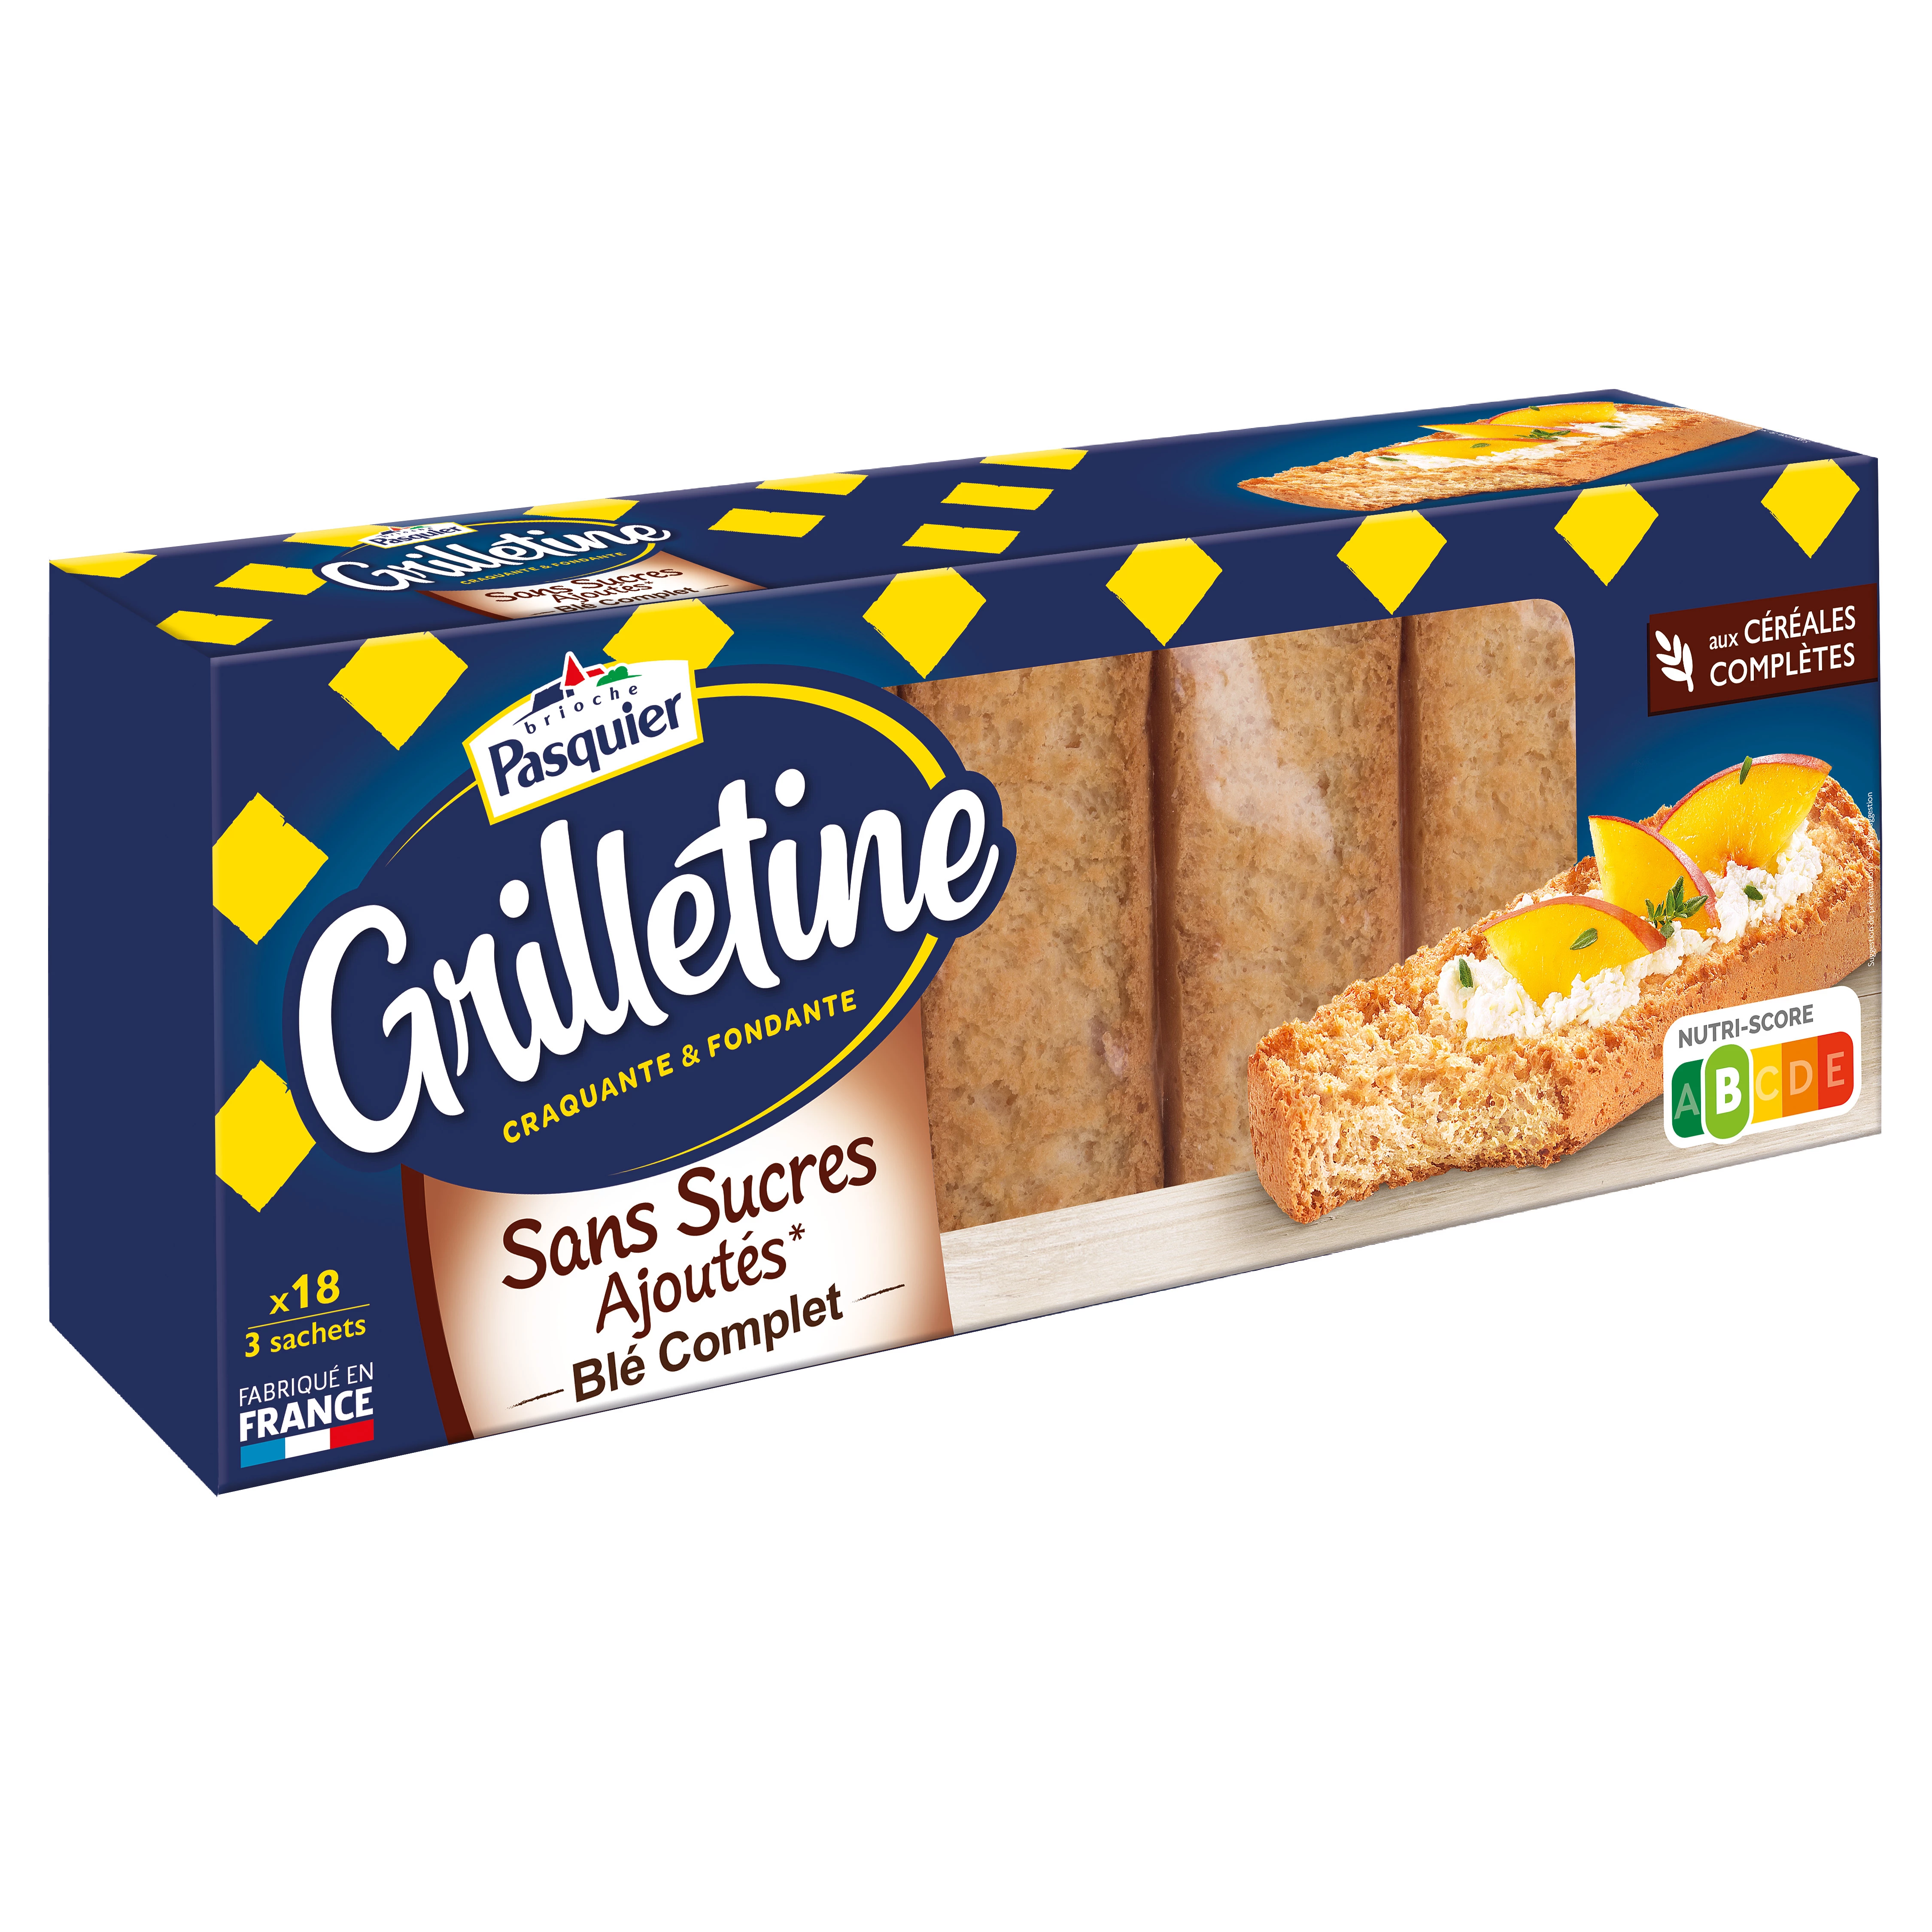 Whole Wheat Grilletine No Added Sugars 255g - PASQUIER